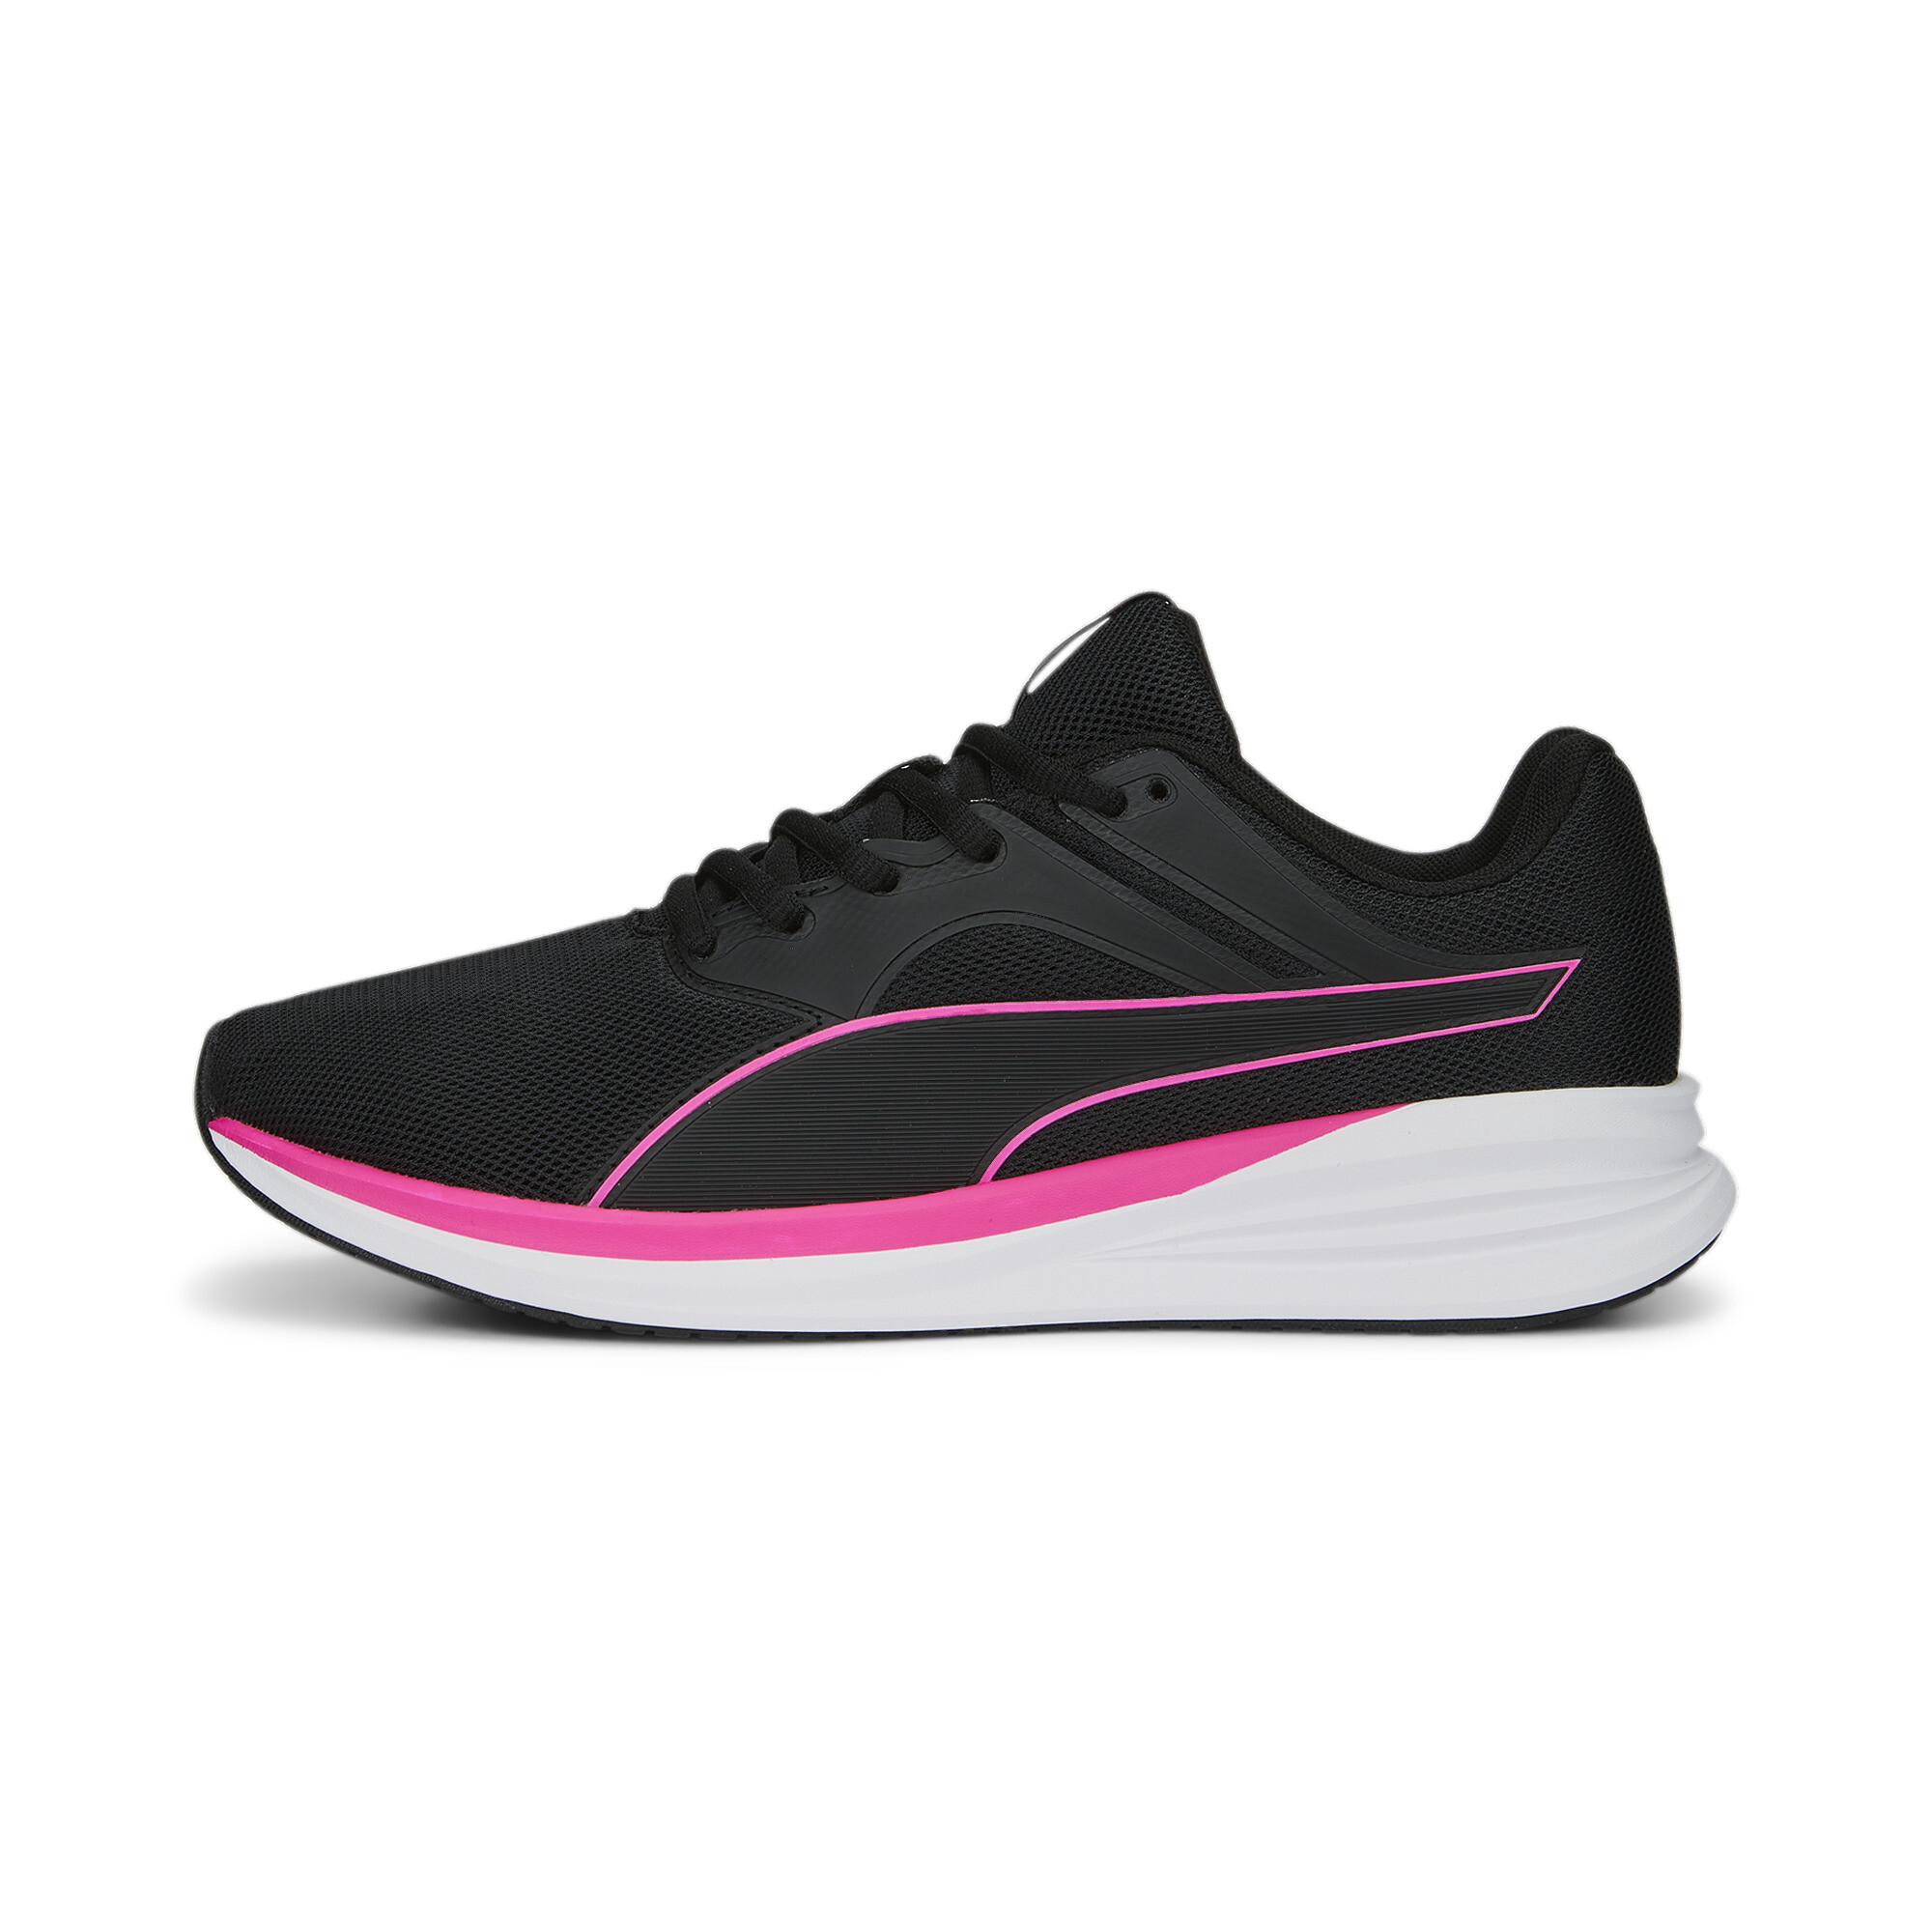 Puma Transport Running Shoes, Black, Size 38.5, Shoes